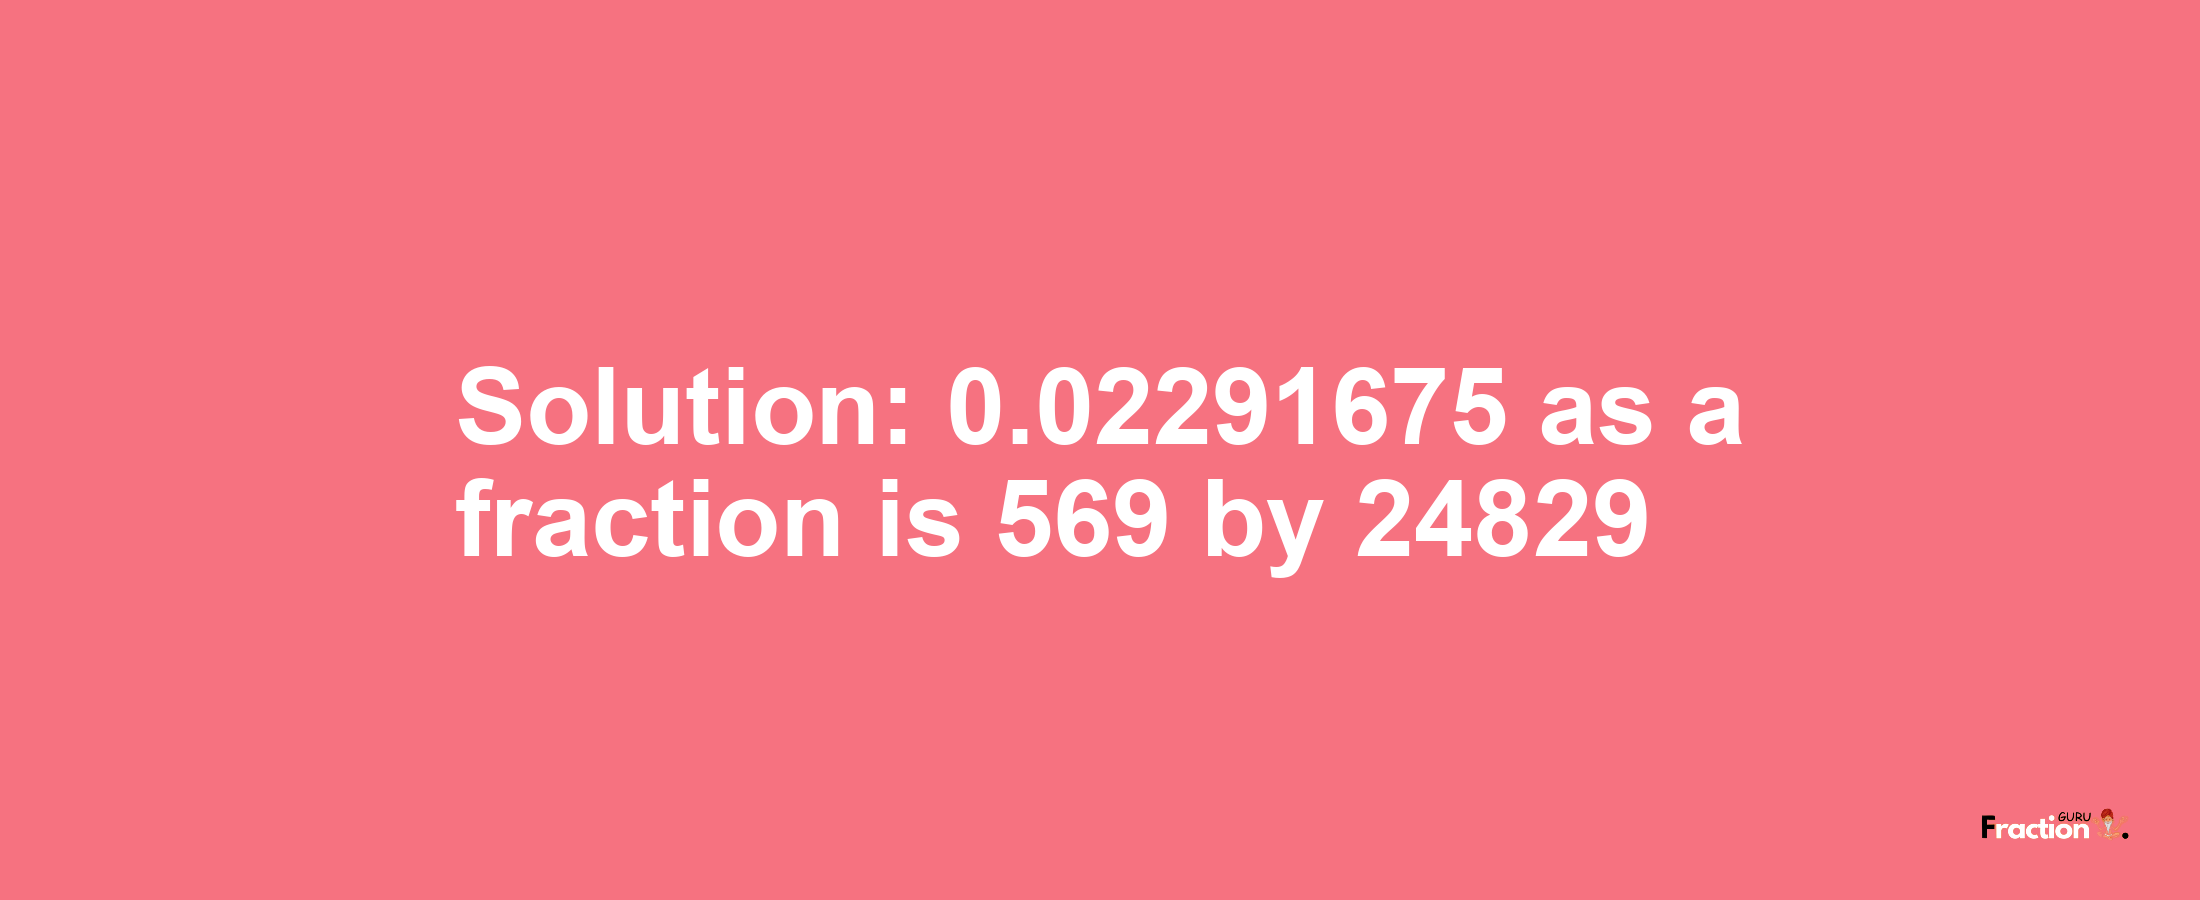 Solution:0.02291675 as a fraction is 569/24829